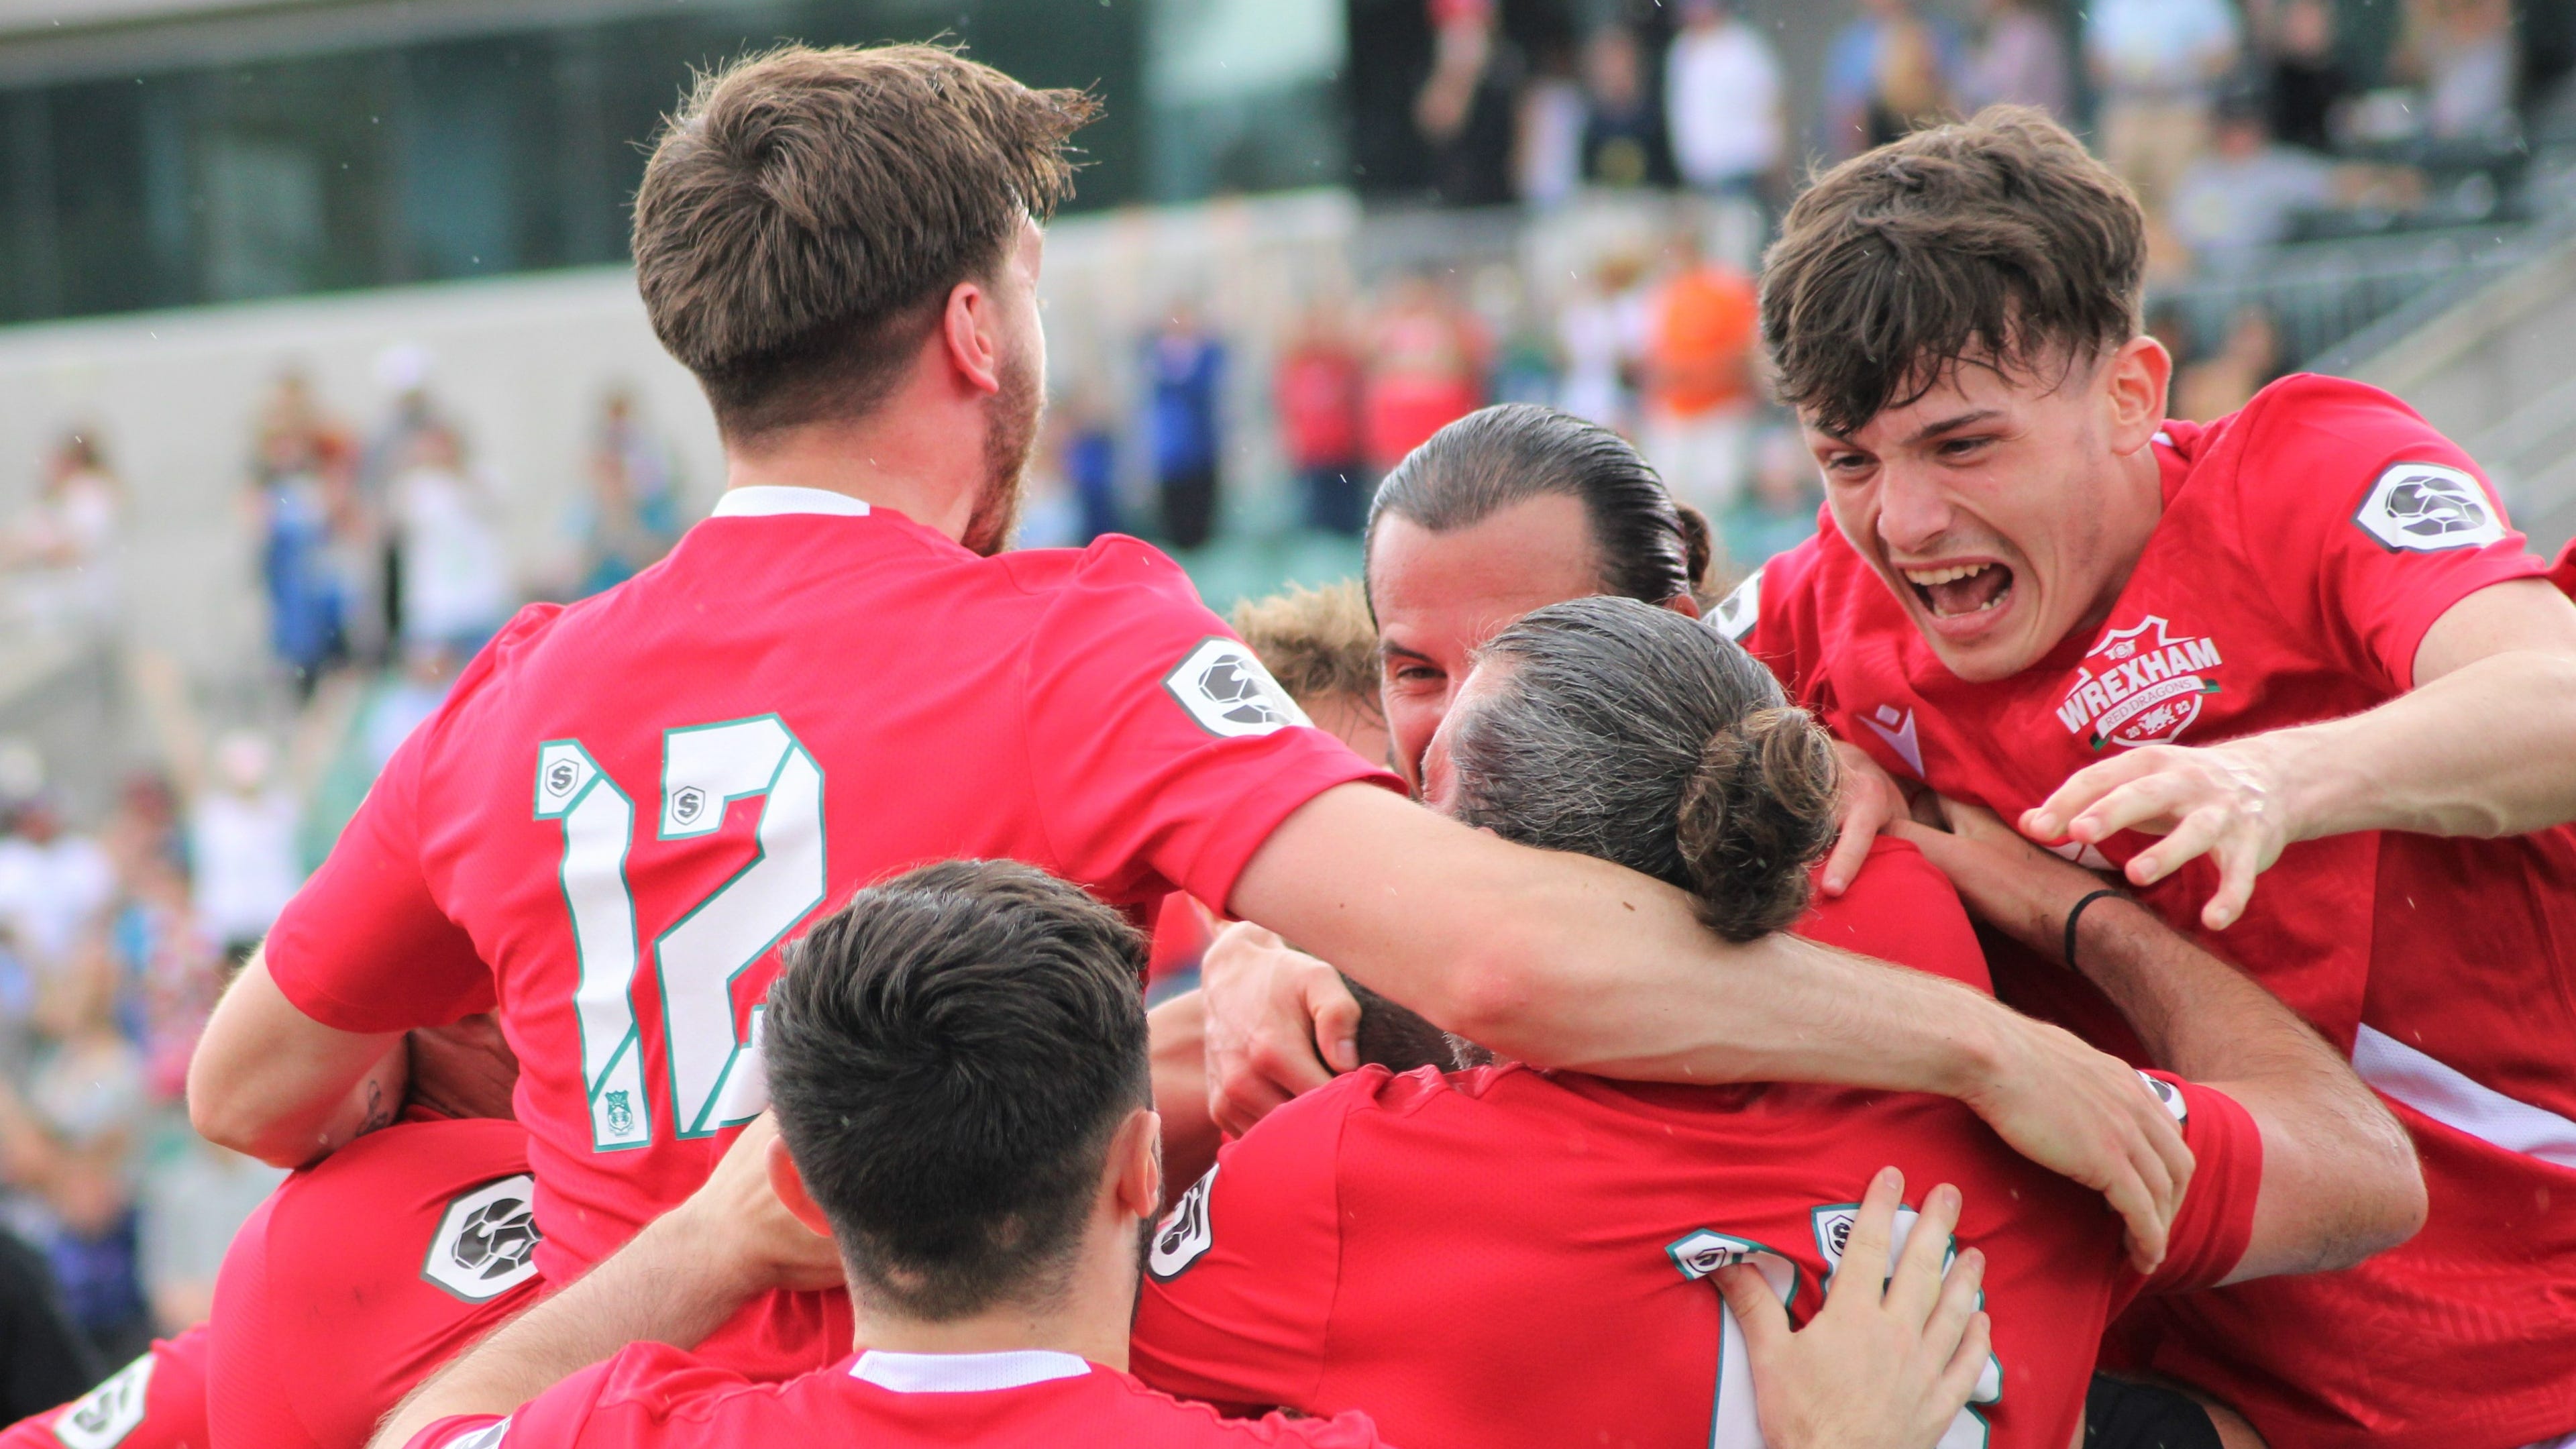 Wrexham come from behind to win dramatic opening match of The Soccer Tournament against Serie B side Como 1907